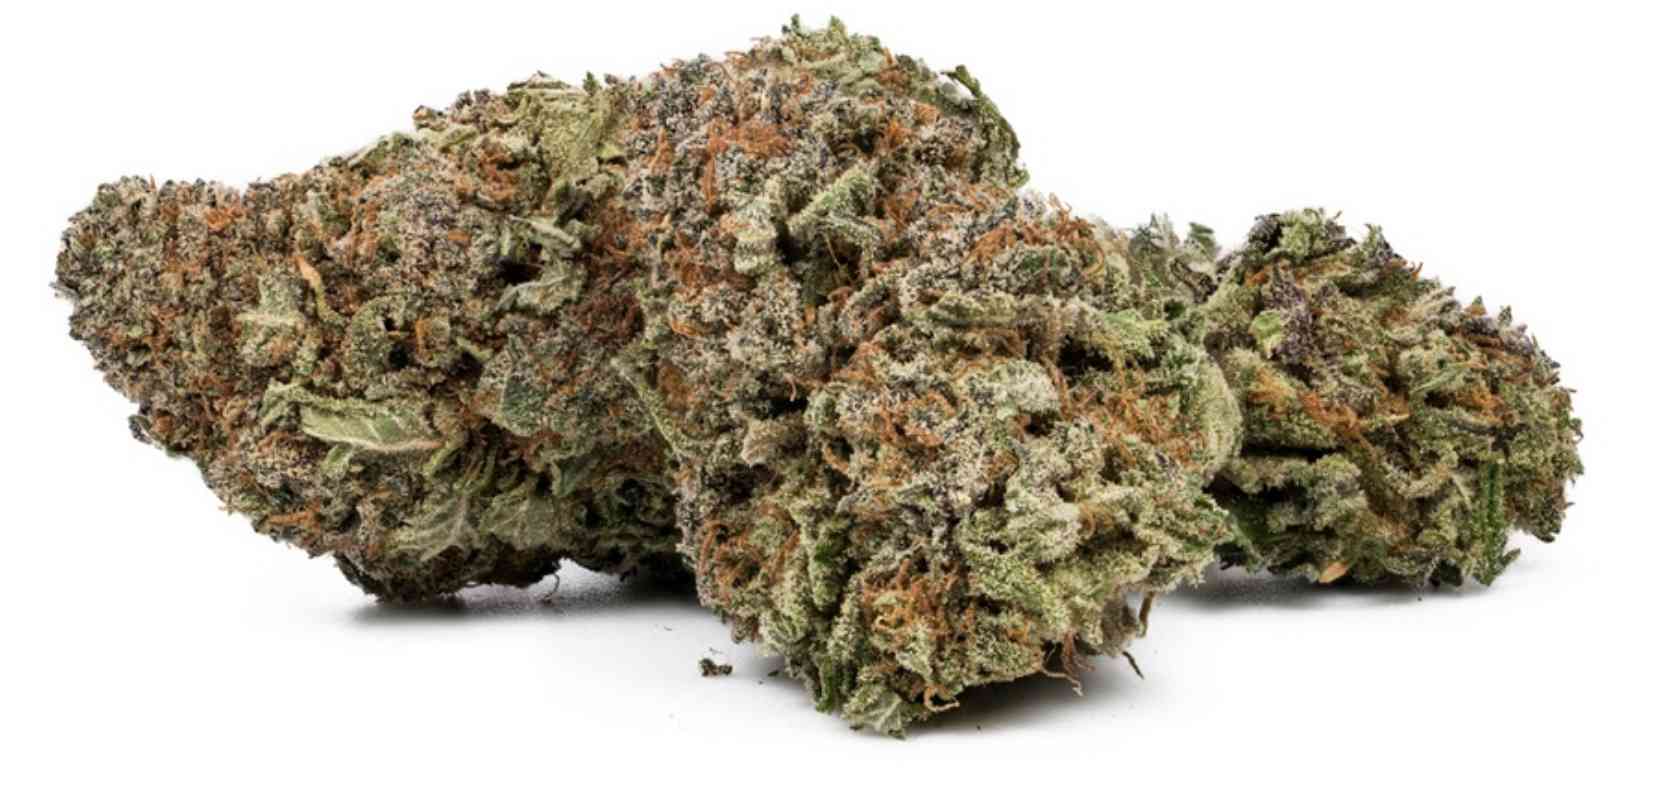 Purple Nuken is a slightly indica-dominant strain with a 60-40 indica to sativa ratio.